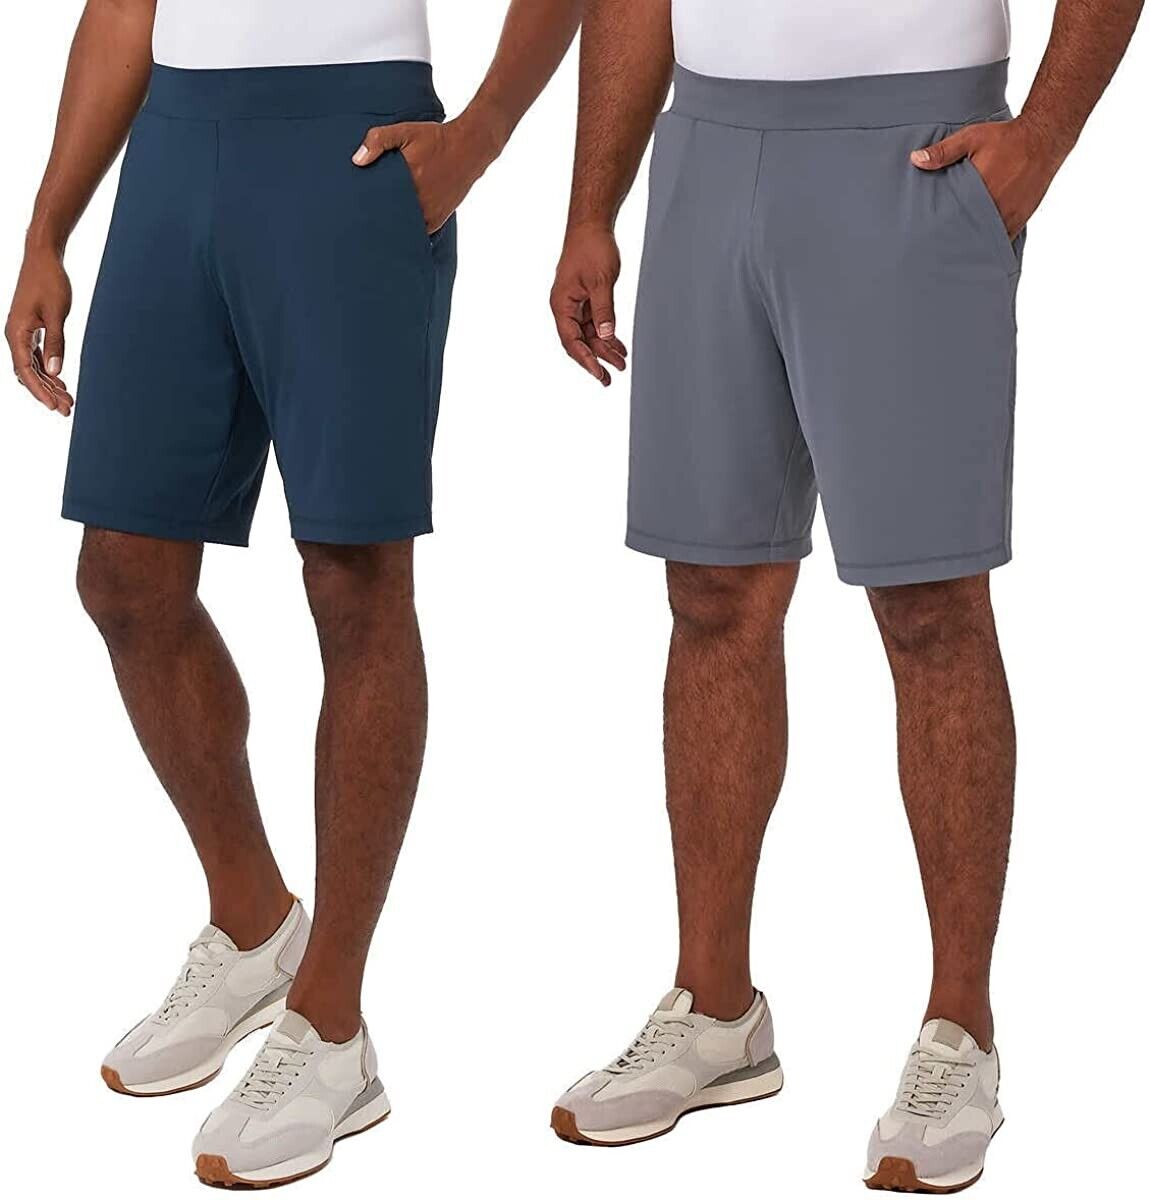 32° Degrees Cool Performance Active Short 2Pk Med Gray/Blue Stretch Breathable